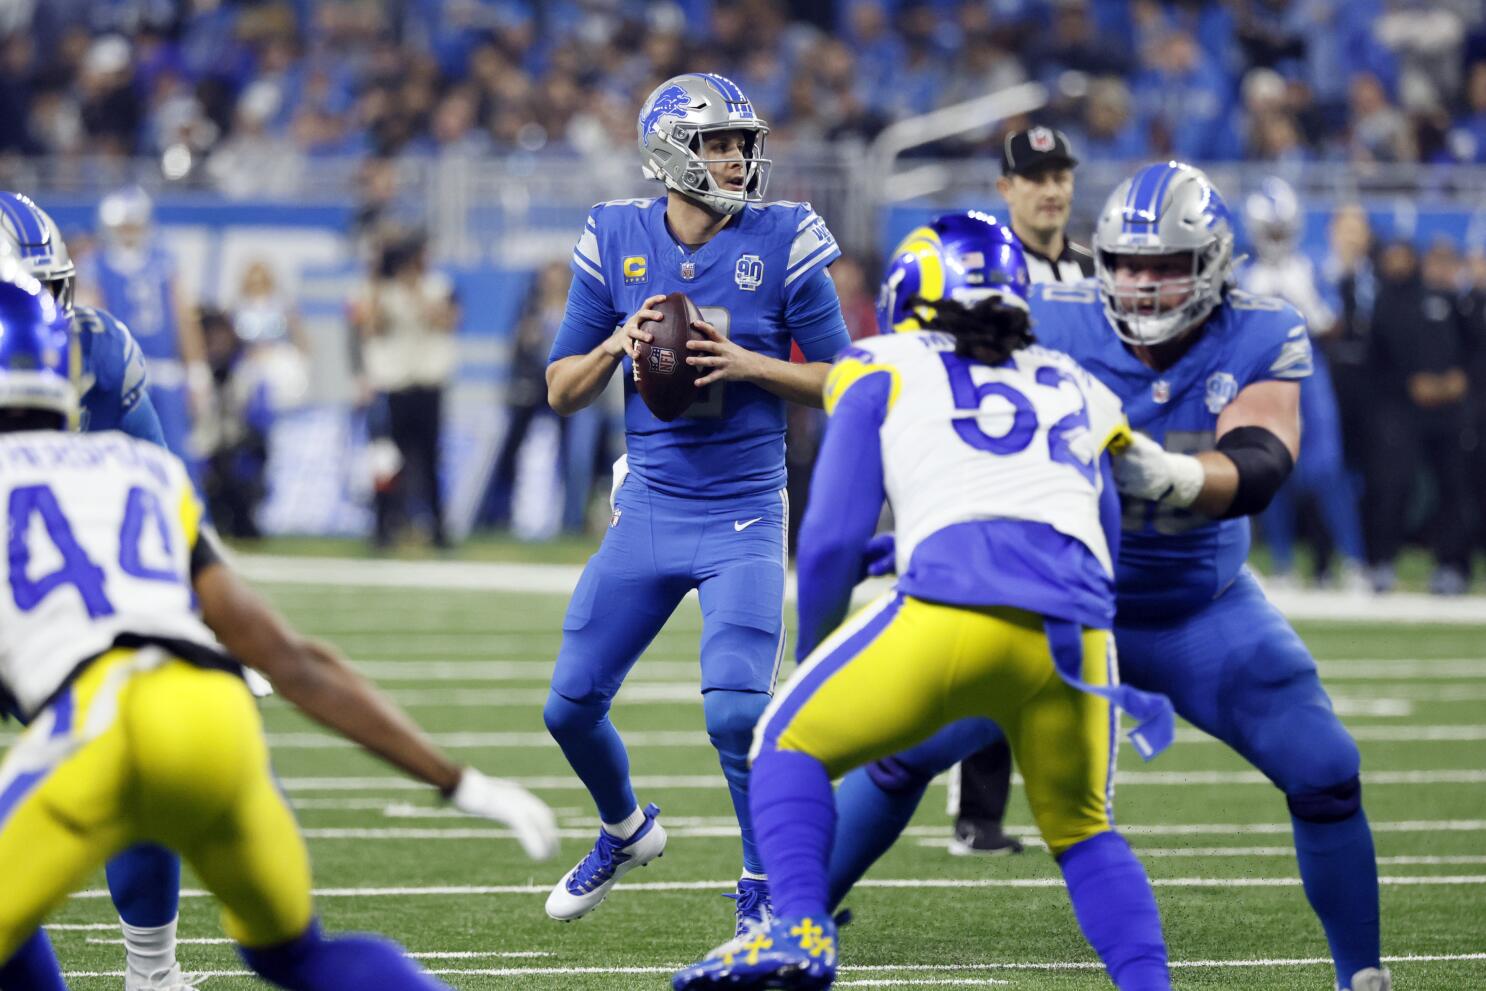 Lions defeat Rams by 1 point for 1st playoff win in 32 years, ending  historic losing streak